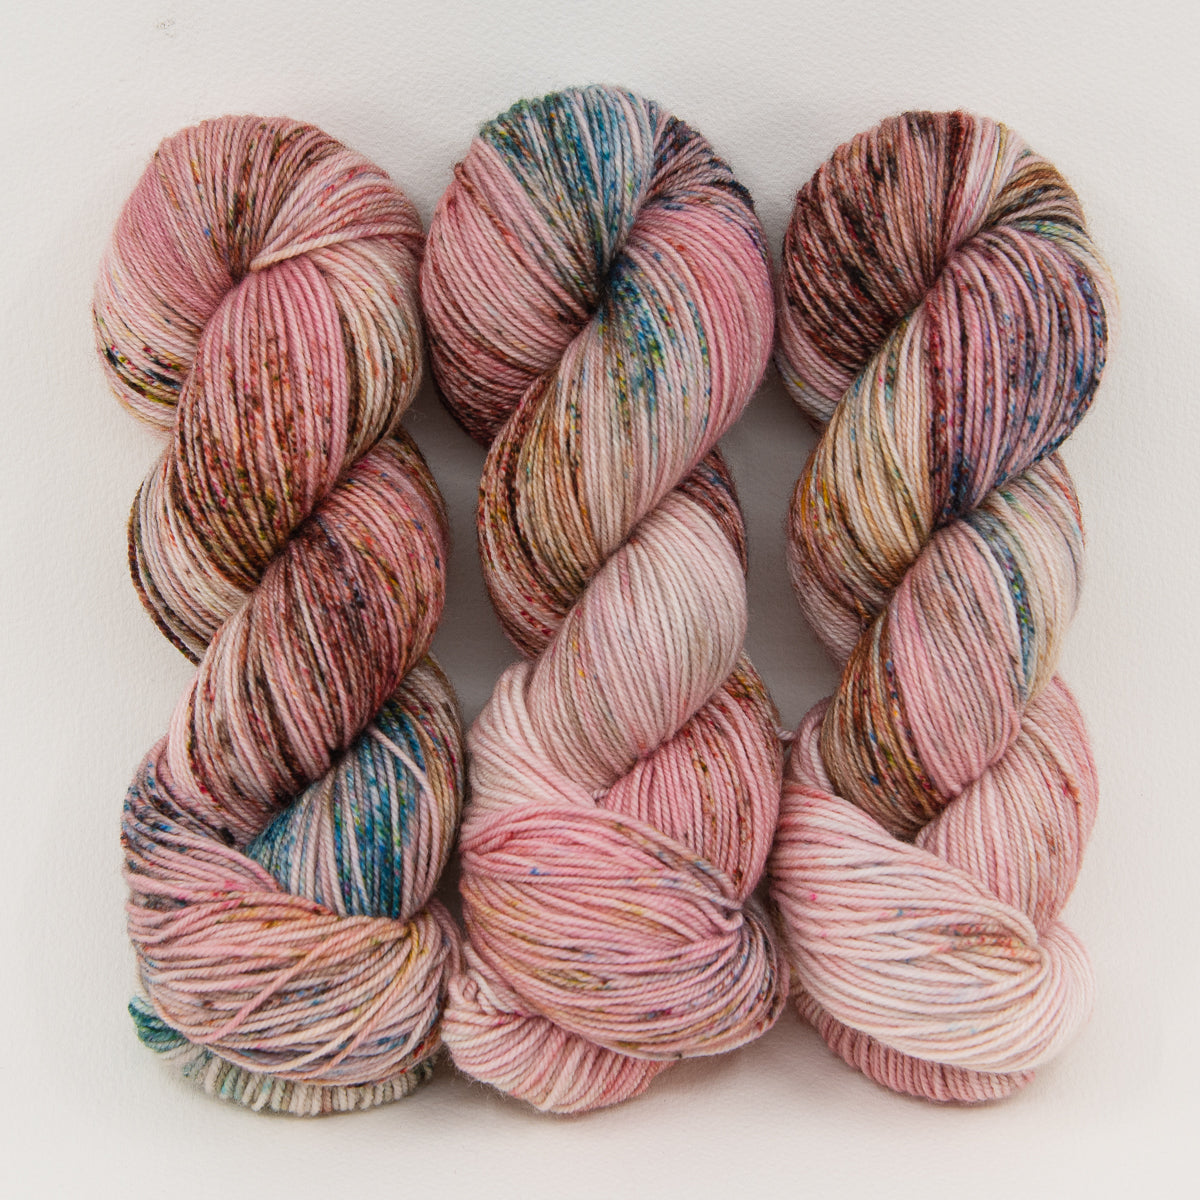 Jemima Puddle-Duck - Revival Worsted - Dyed Stock